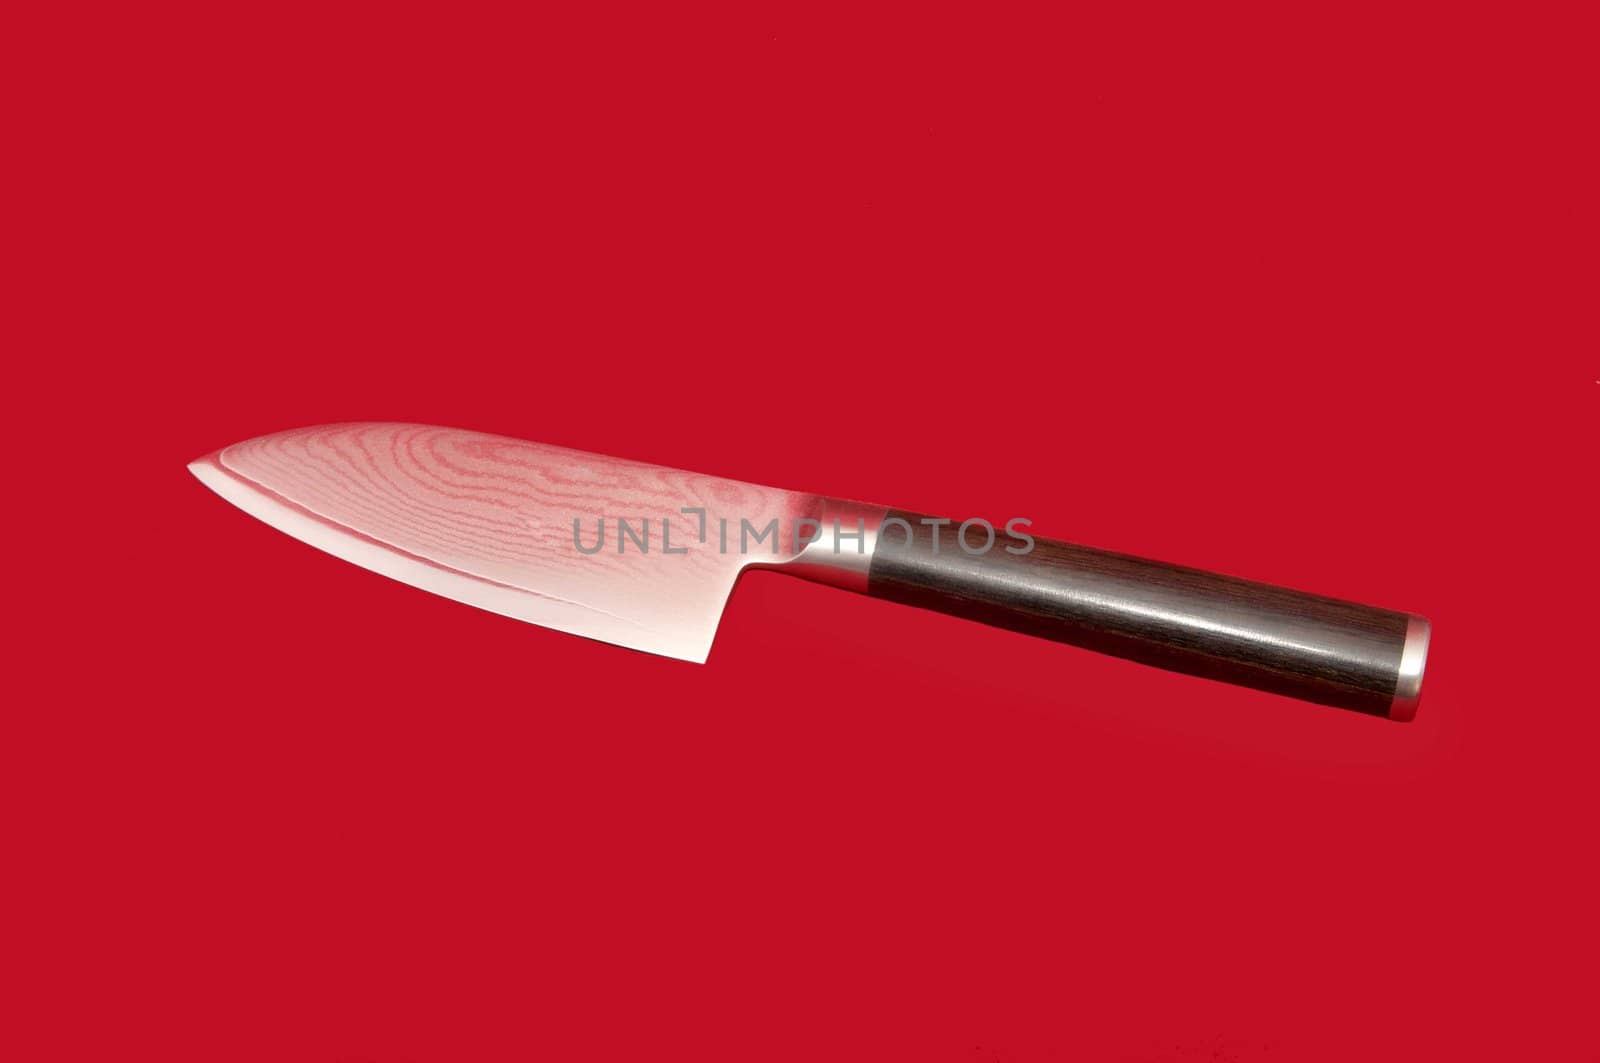 Bread knife on a red background